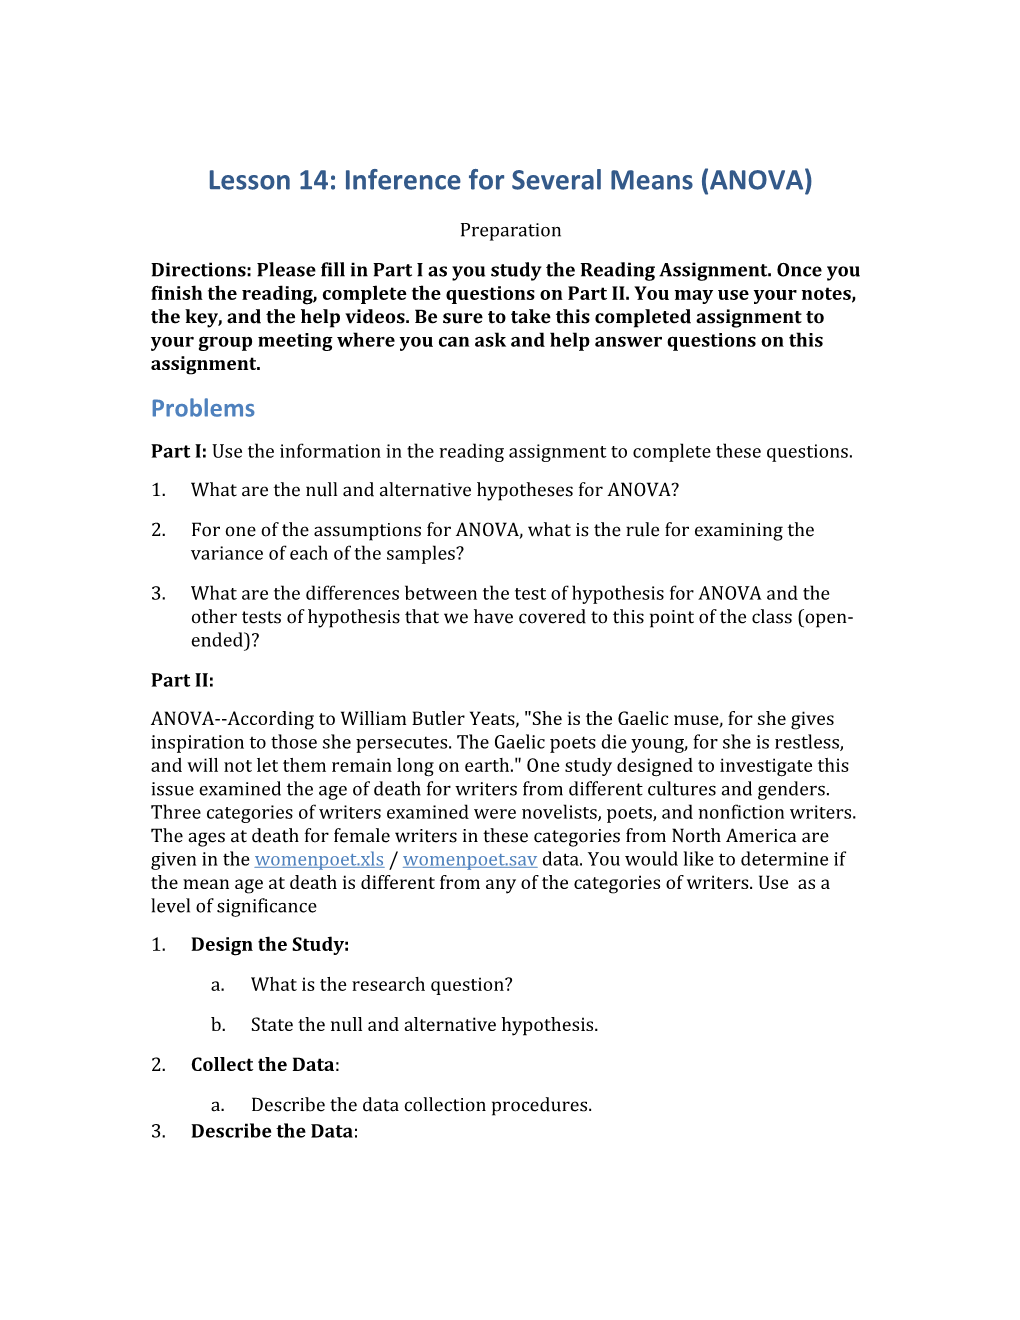 Lesson 14: Inference for Several Means (ANOVA)